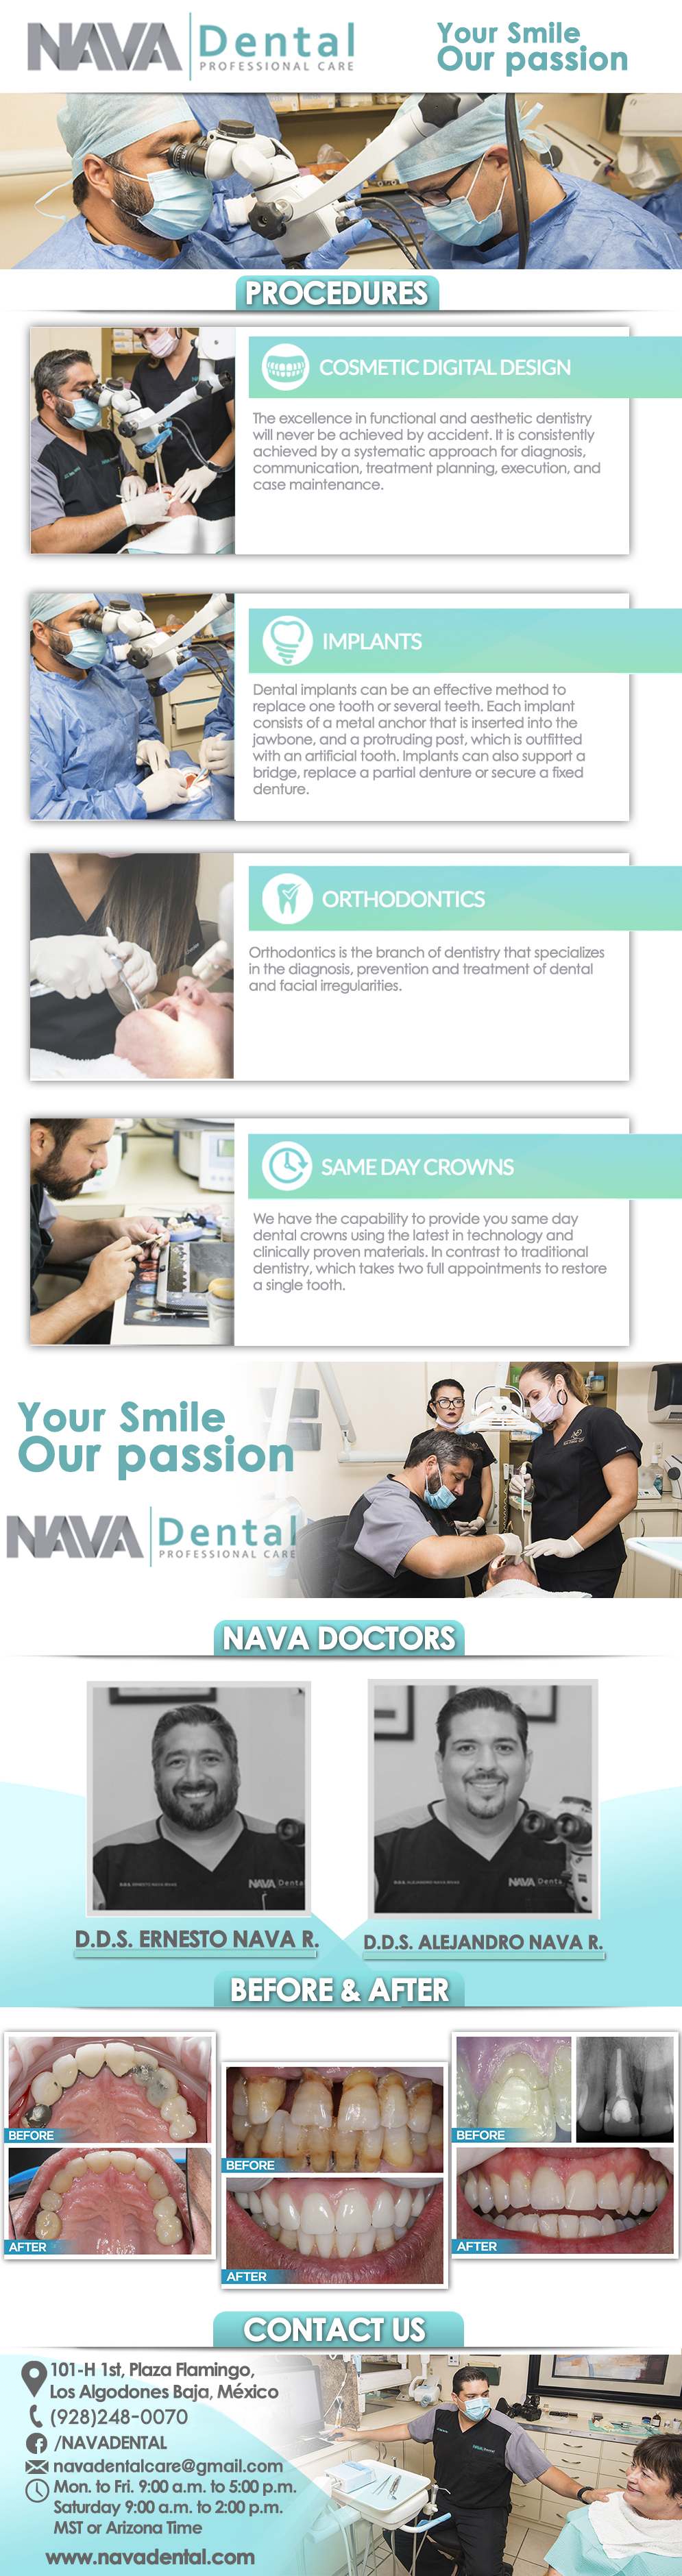 Nava Dental Care-General Dentistry and Specialists We offer complete dental services including general dentistry, cosmetic dentistry, periodontics, endodontics, orthodontics and dental implants. Bridges °X-Rays °Porcelain Veneers °Metal Crowns °Dental Bonding °Deep Cleaning °Denture Repair °Traditional Acrylic Dentures °Prescriptions °Root Canals °Metal Bridges °White Fillings °Root Canal Therapy Relines (Hard or Soft) °General Oral Surgeries °Porcelain Crowns °Flexible Partials °Composite Posts °Teeth Whitening °Extractions °Flexible Parials Implants °Porcelain Veneers °Wisdom Tooth Extractions °Metal Posts °Traditional Cleaning °Metal/Acrylic Partials °Immediate Upper and Lower Dentures (Alveoplasty)                